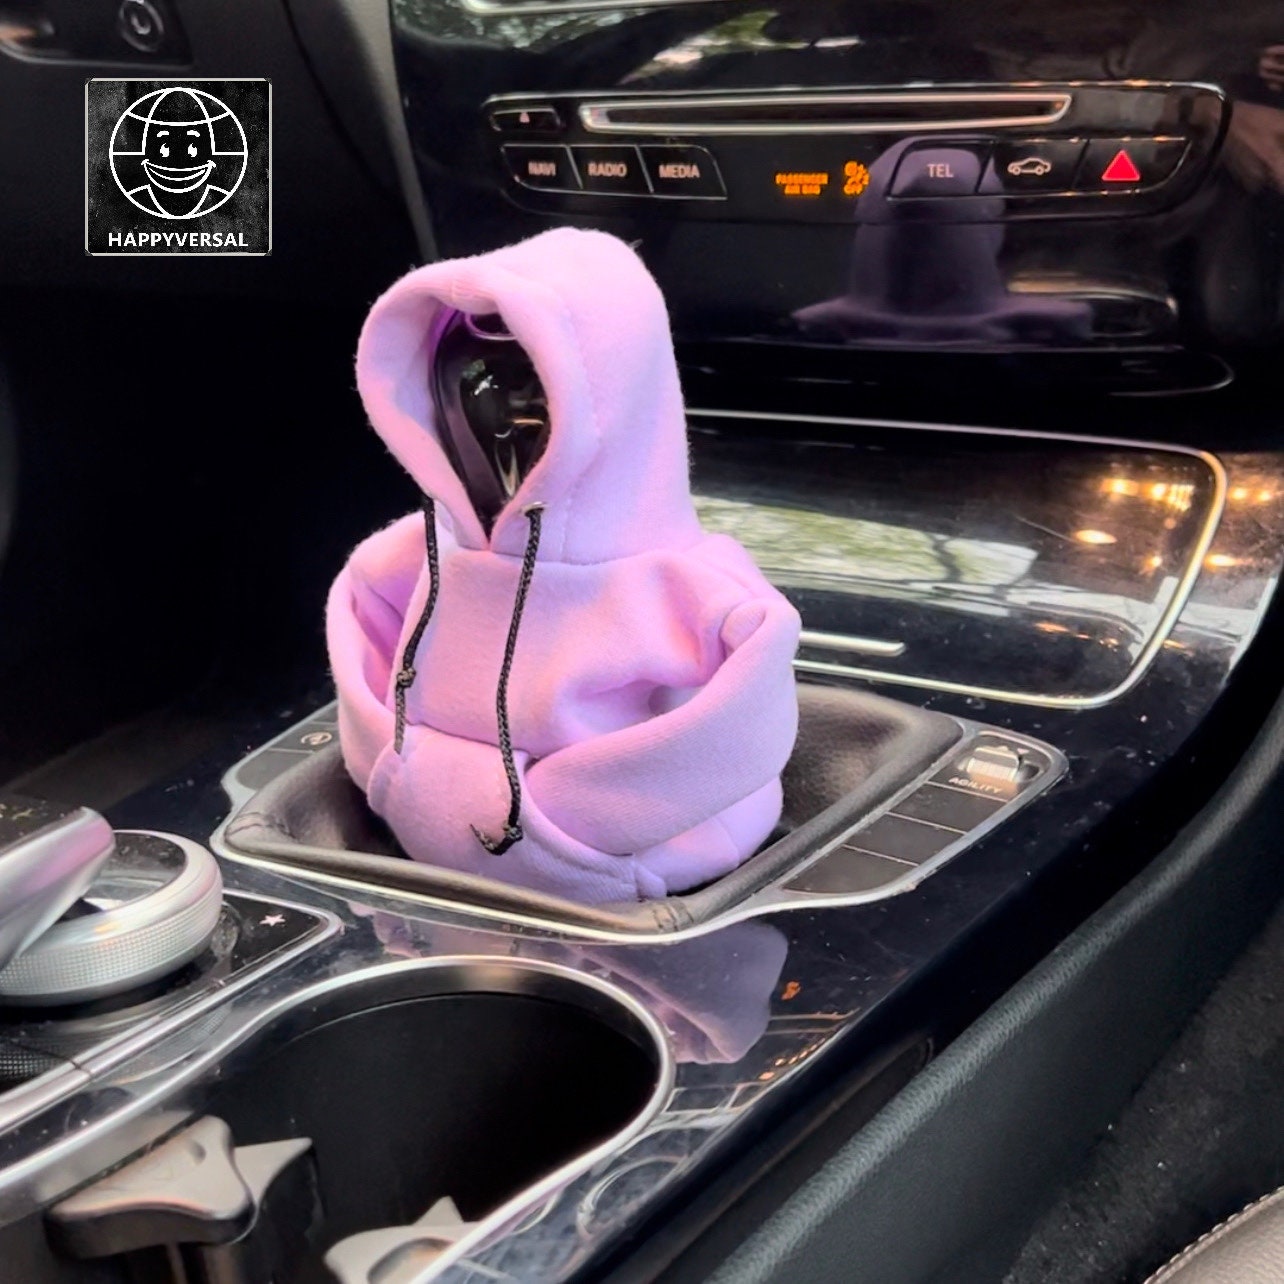 This Gear Shift Knob Hoodie Sweatshirt For Your Car Keeps, 59% OFF